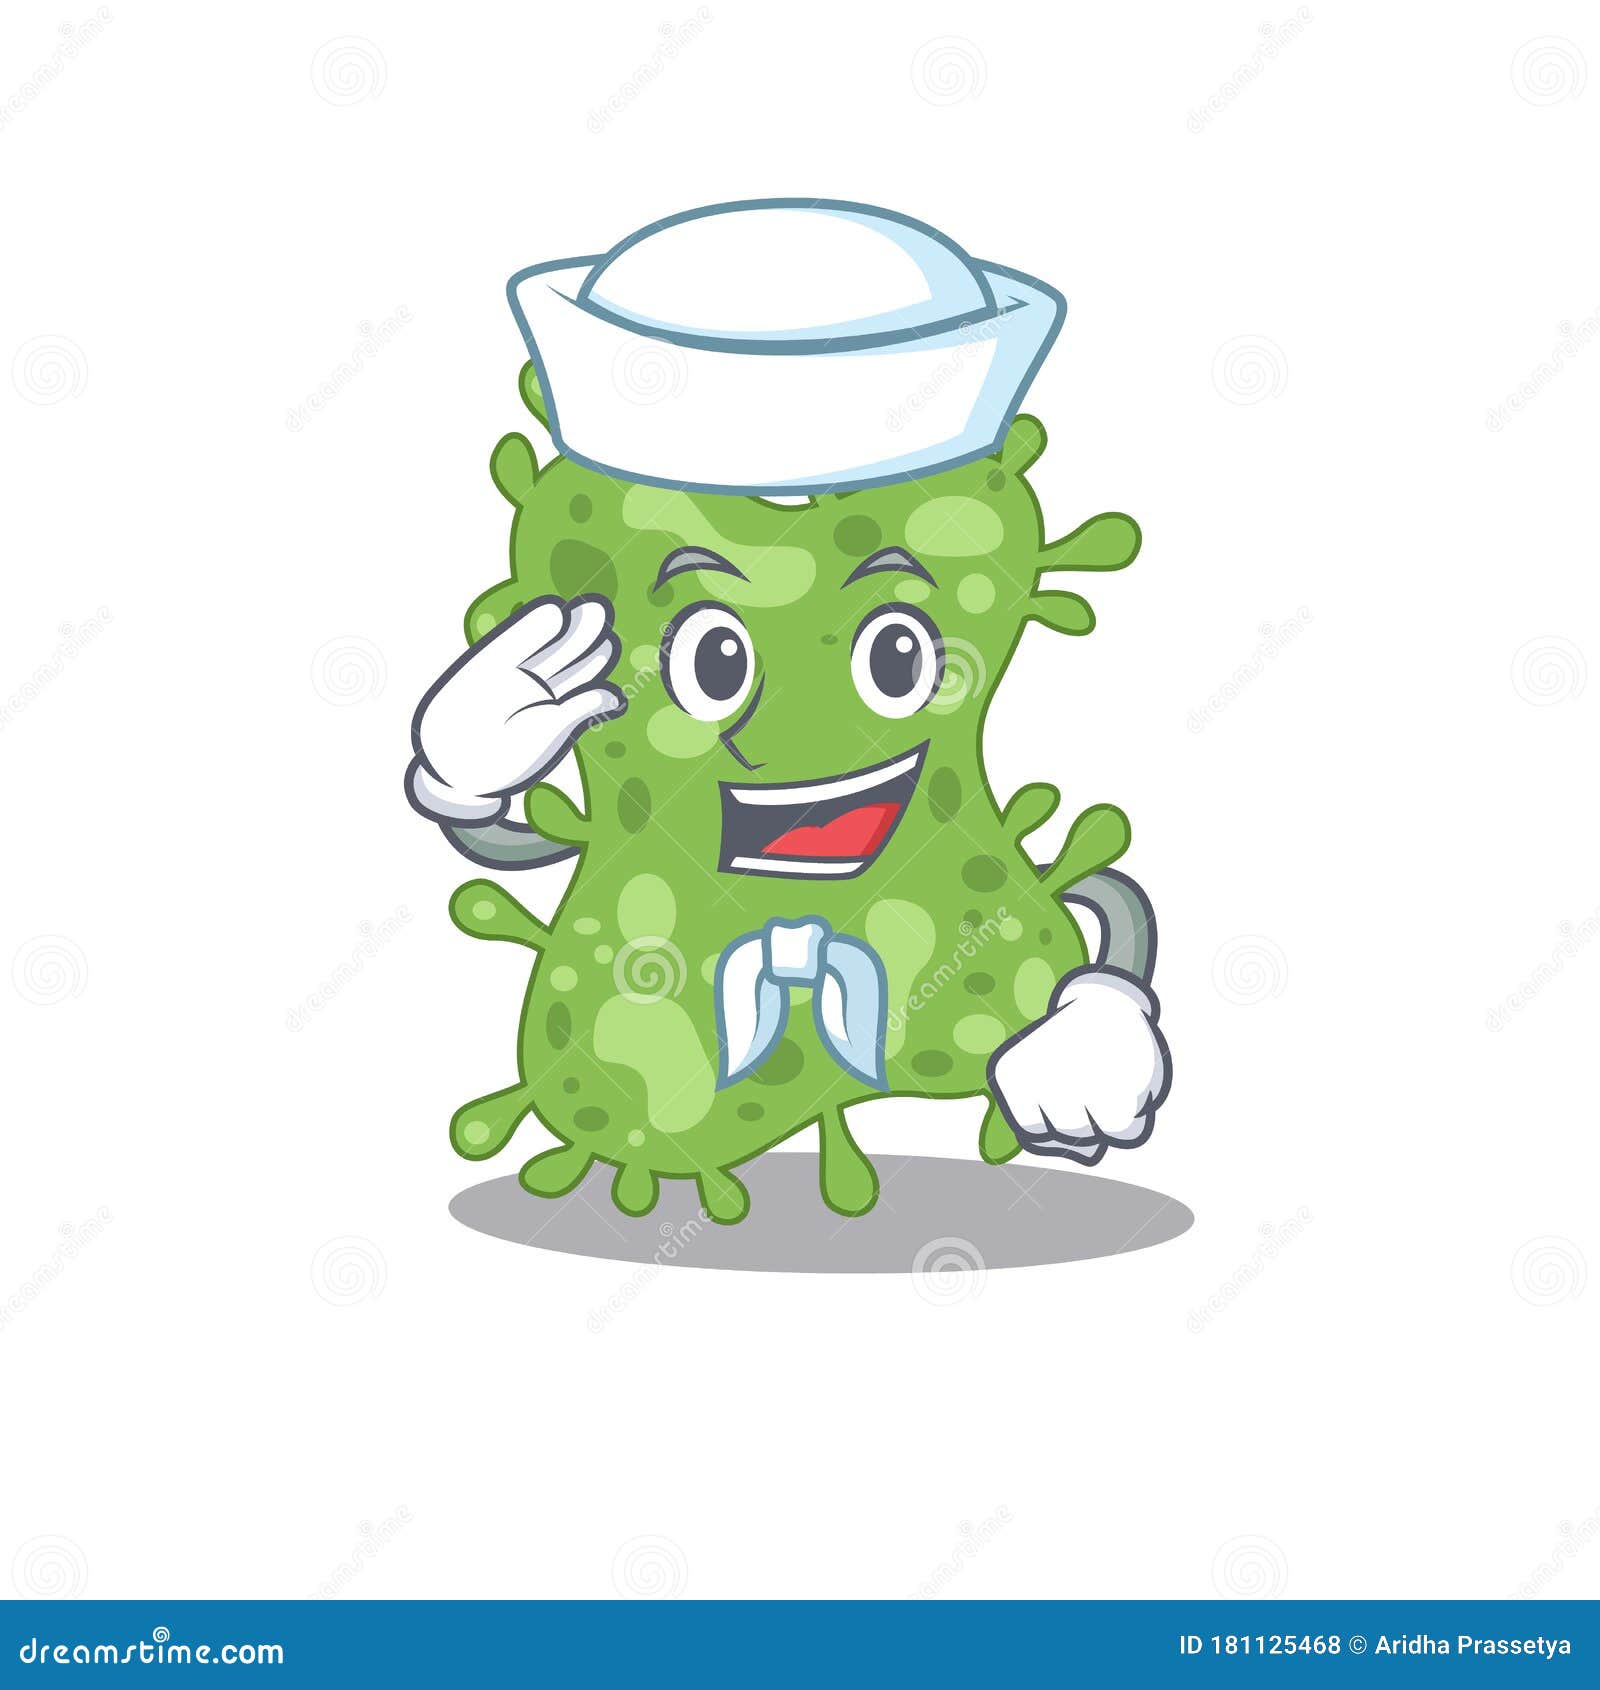 sailor cartoon character of salmonella enterica with white hat